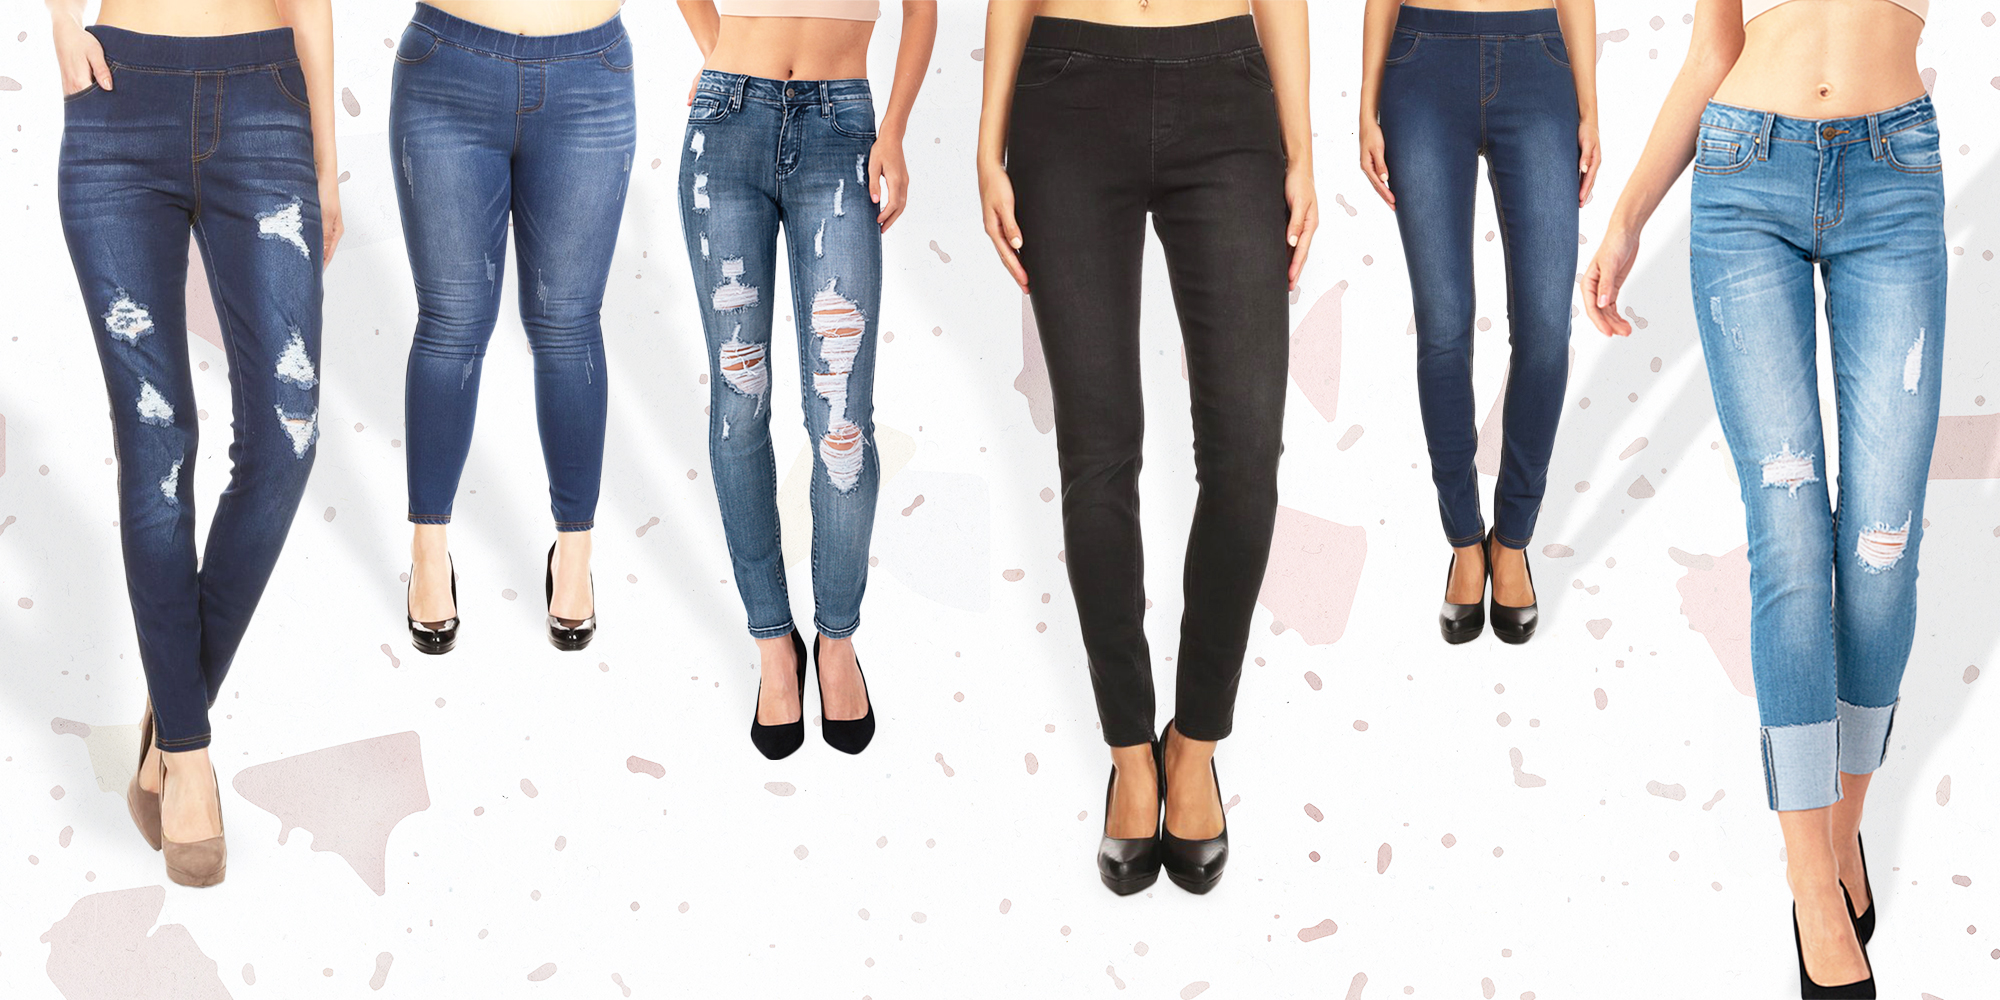 Wholesale Women's Jeans, Jeggings at the Manufacture Wholesale Prices